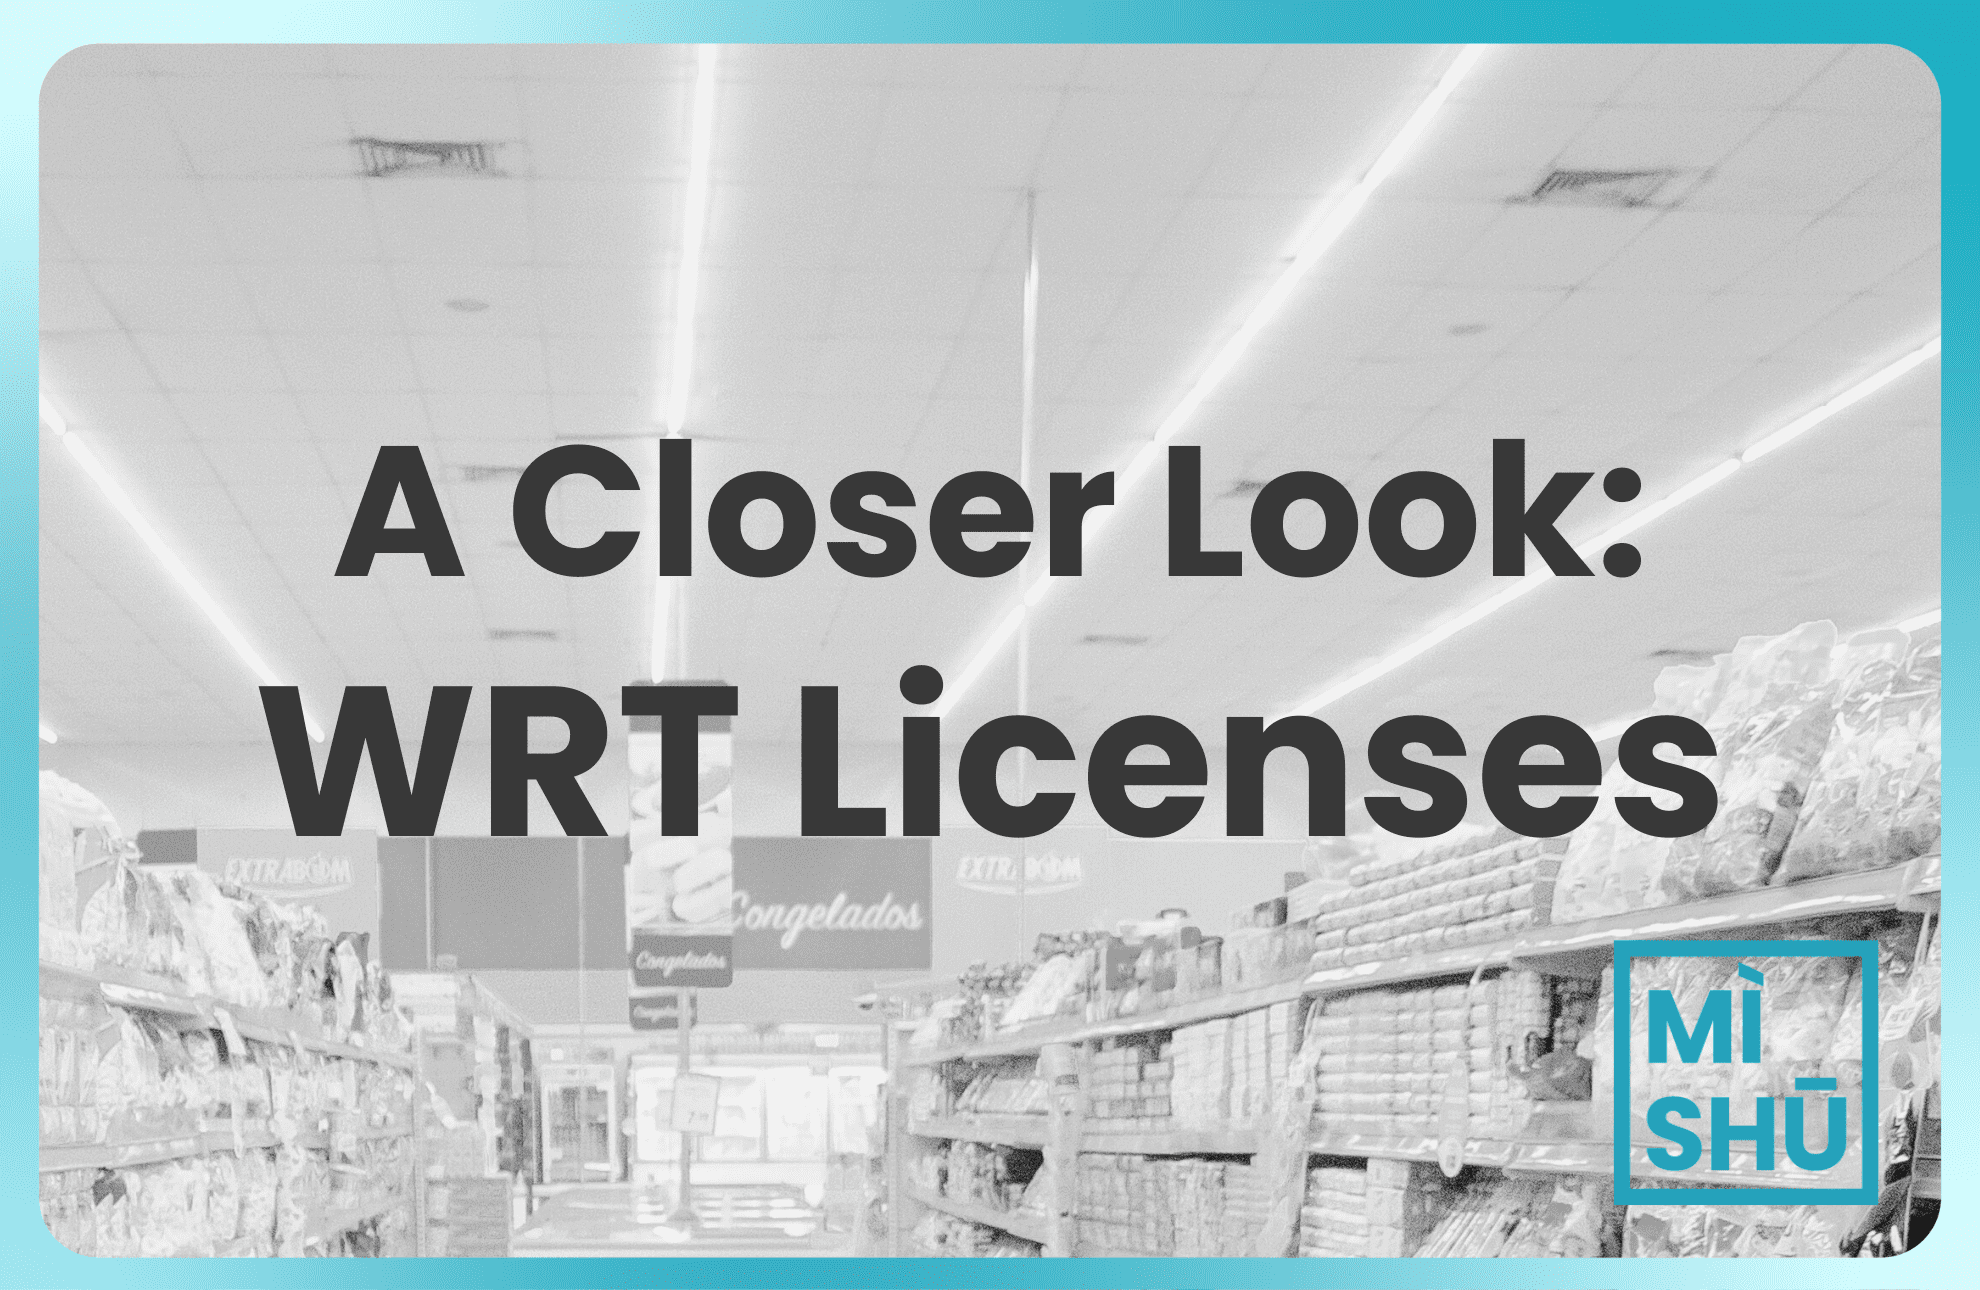 4 Foreign Retail Outlets That Need WRT Licenses To Operate In Malaysia